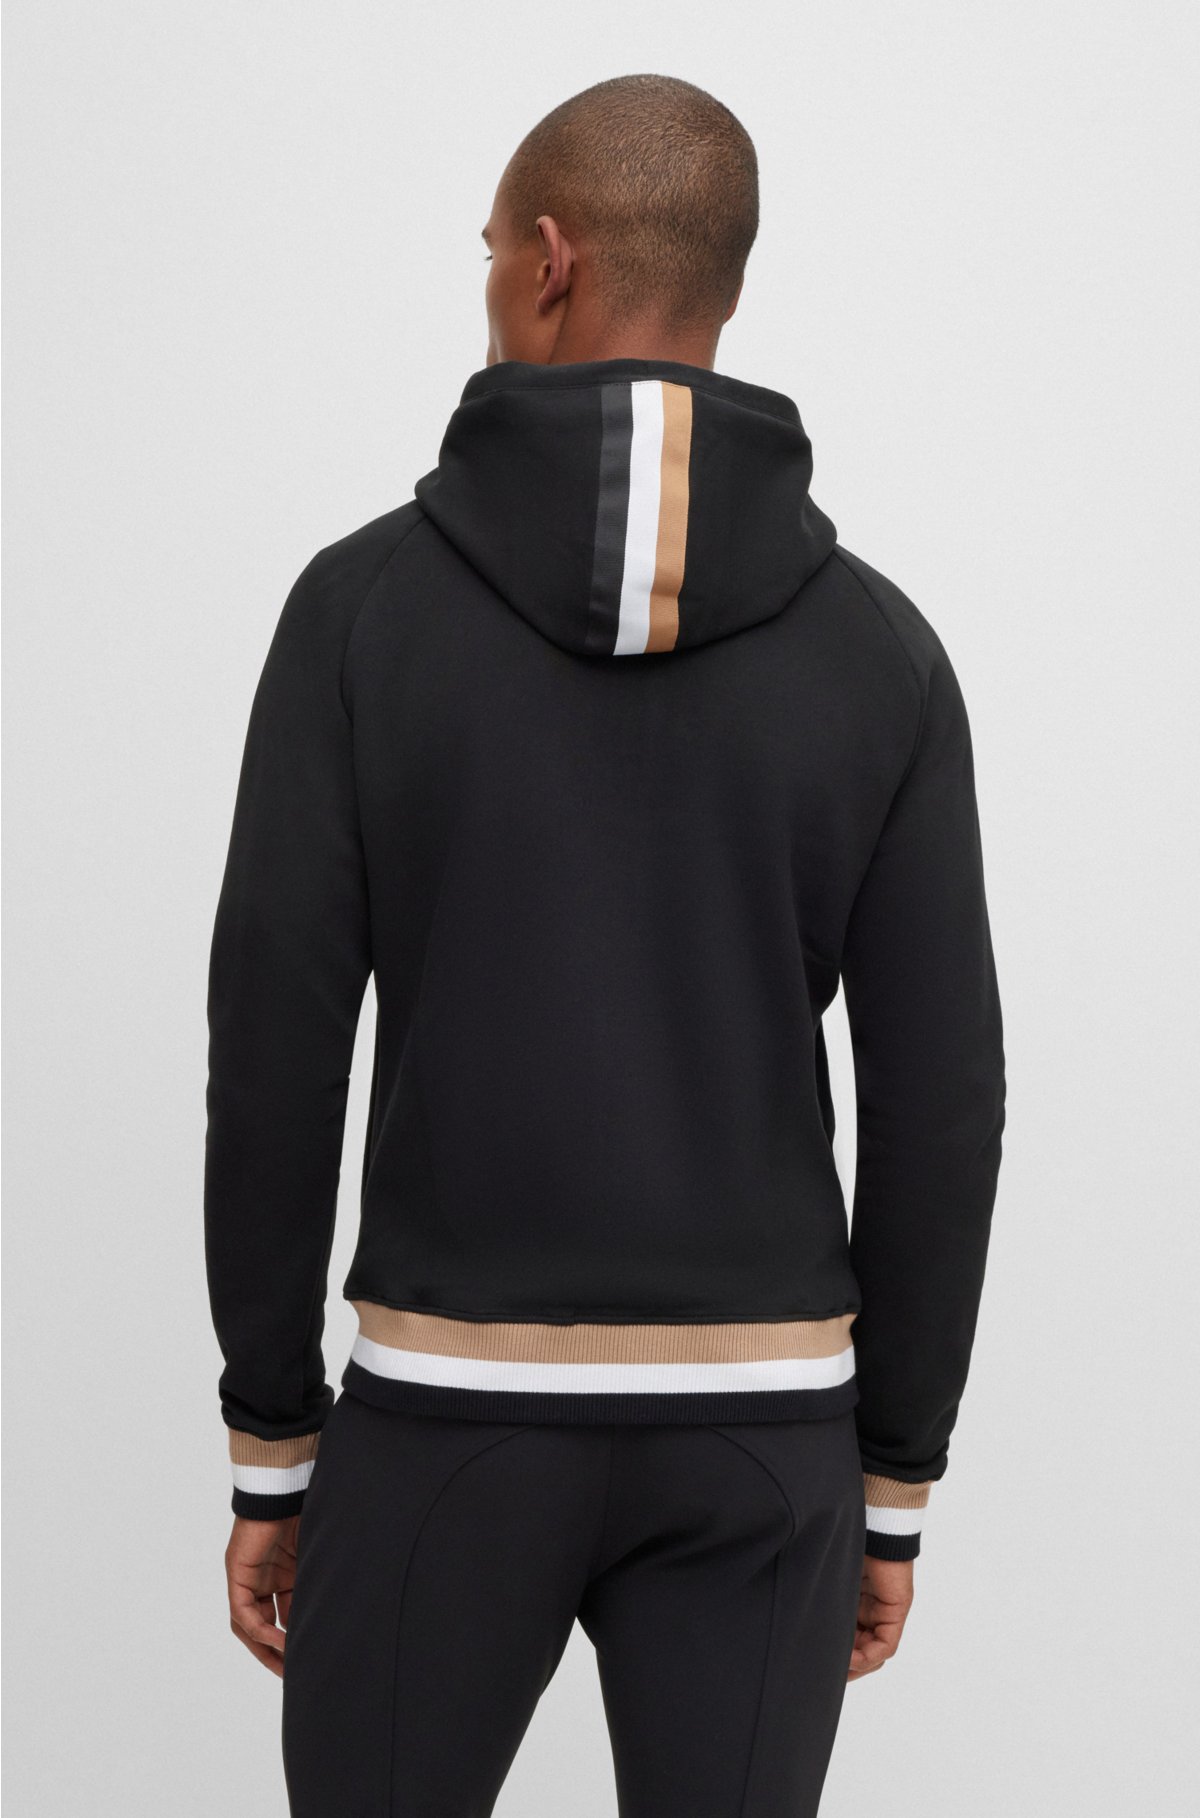 BOSS - Equestrian cotton zip-up hoodie with signature stripes and logo